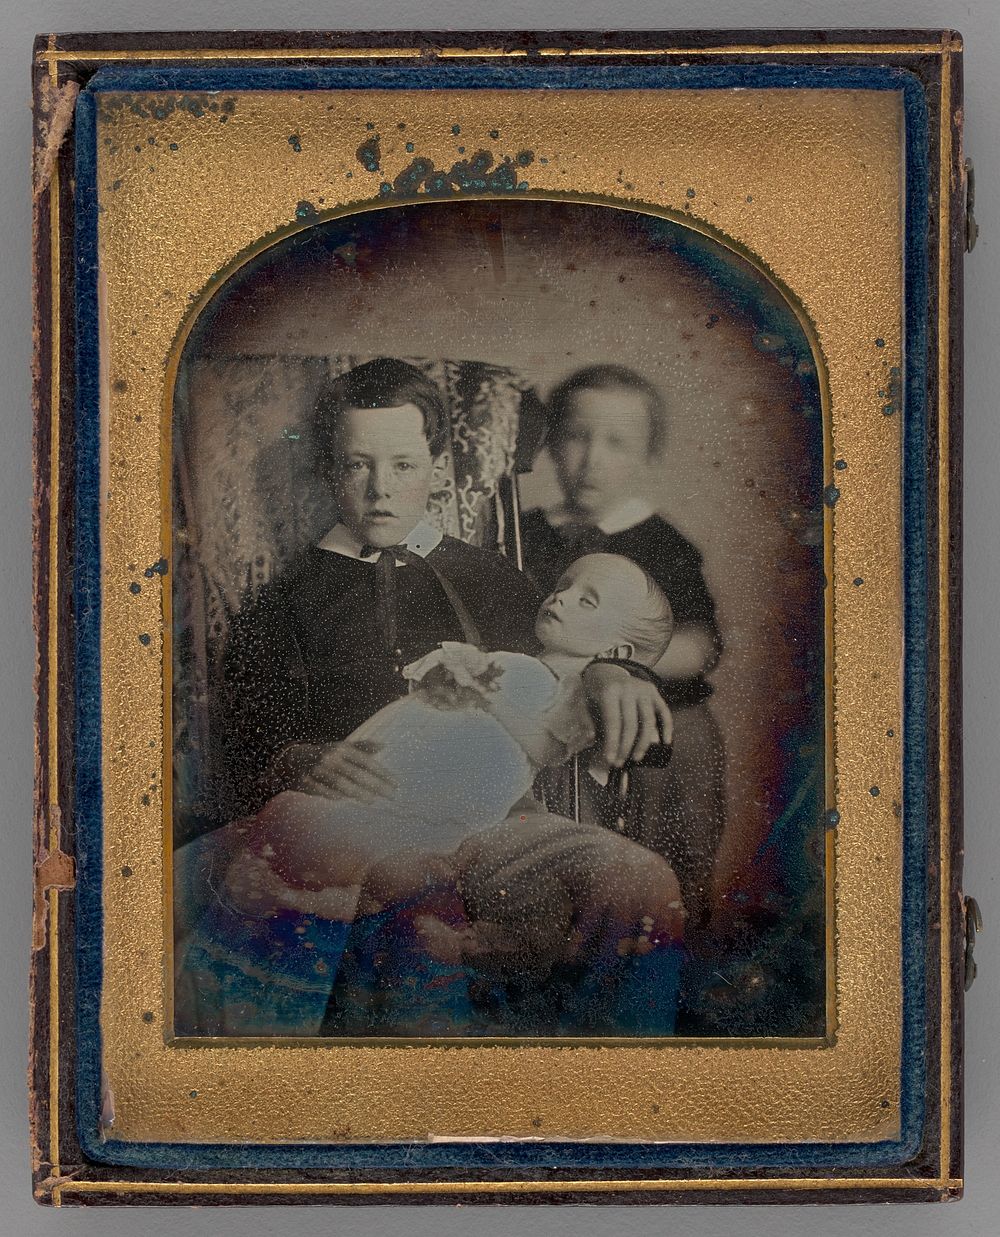 Untitled (Two Boys Holding a Deceased Baby)